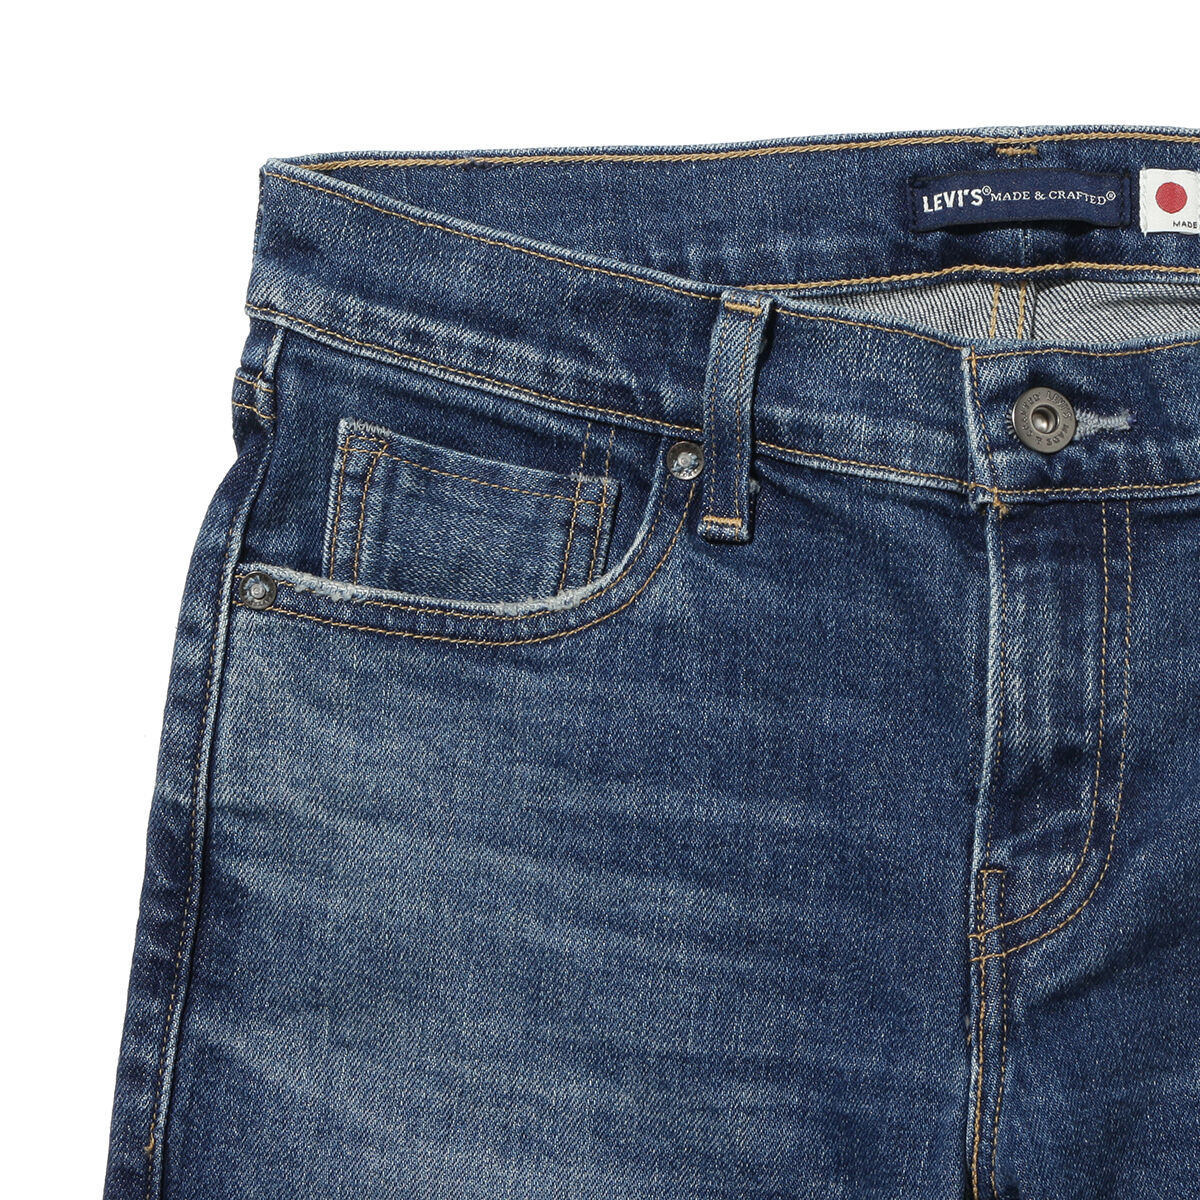 LEVI'S® MADE&CRAFTED®NEW BORROWED FROM THE BOYS YUKI DARK MADE IN 